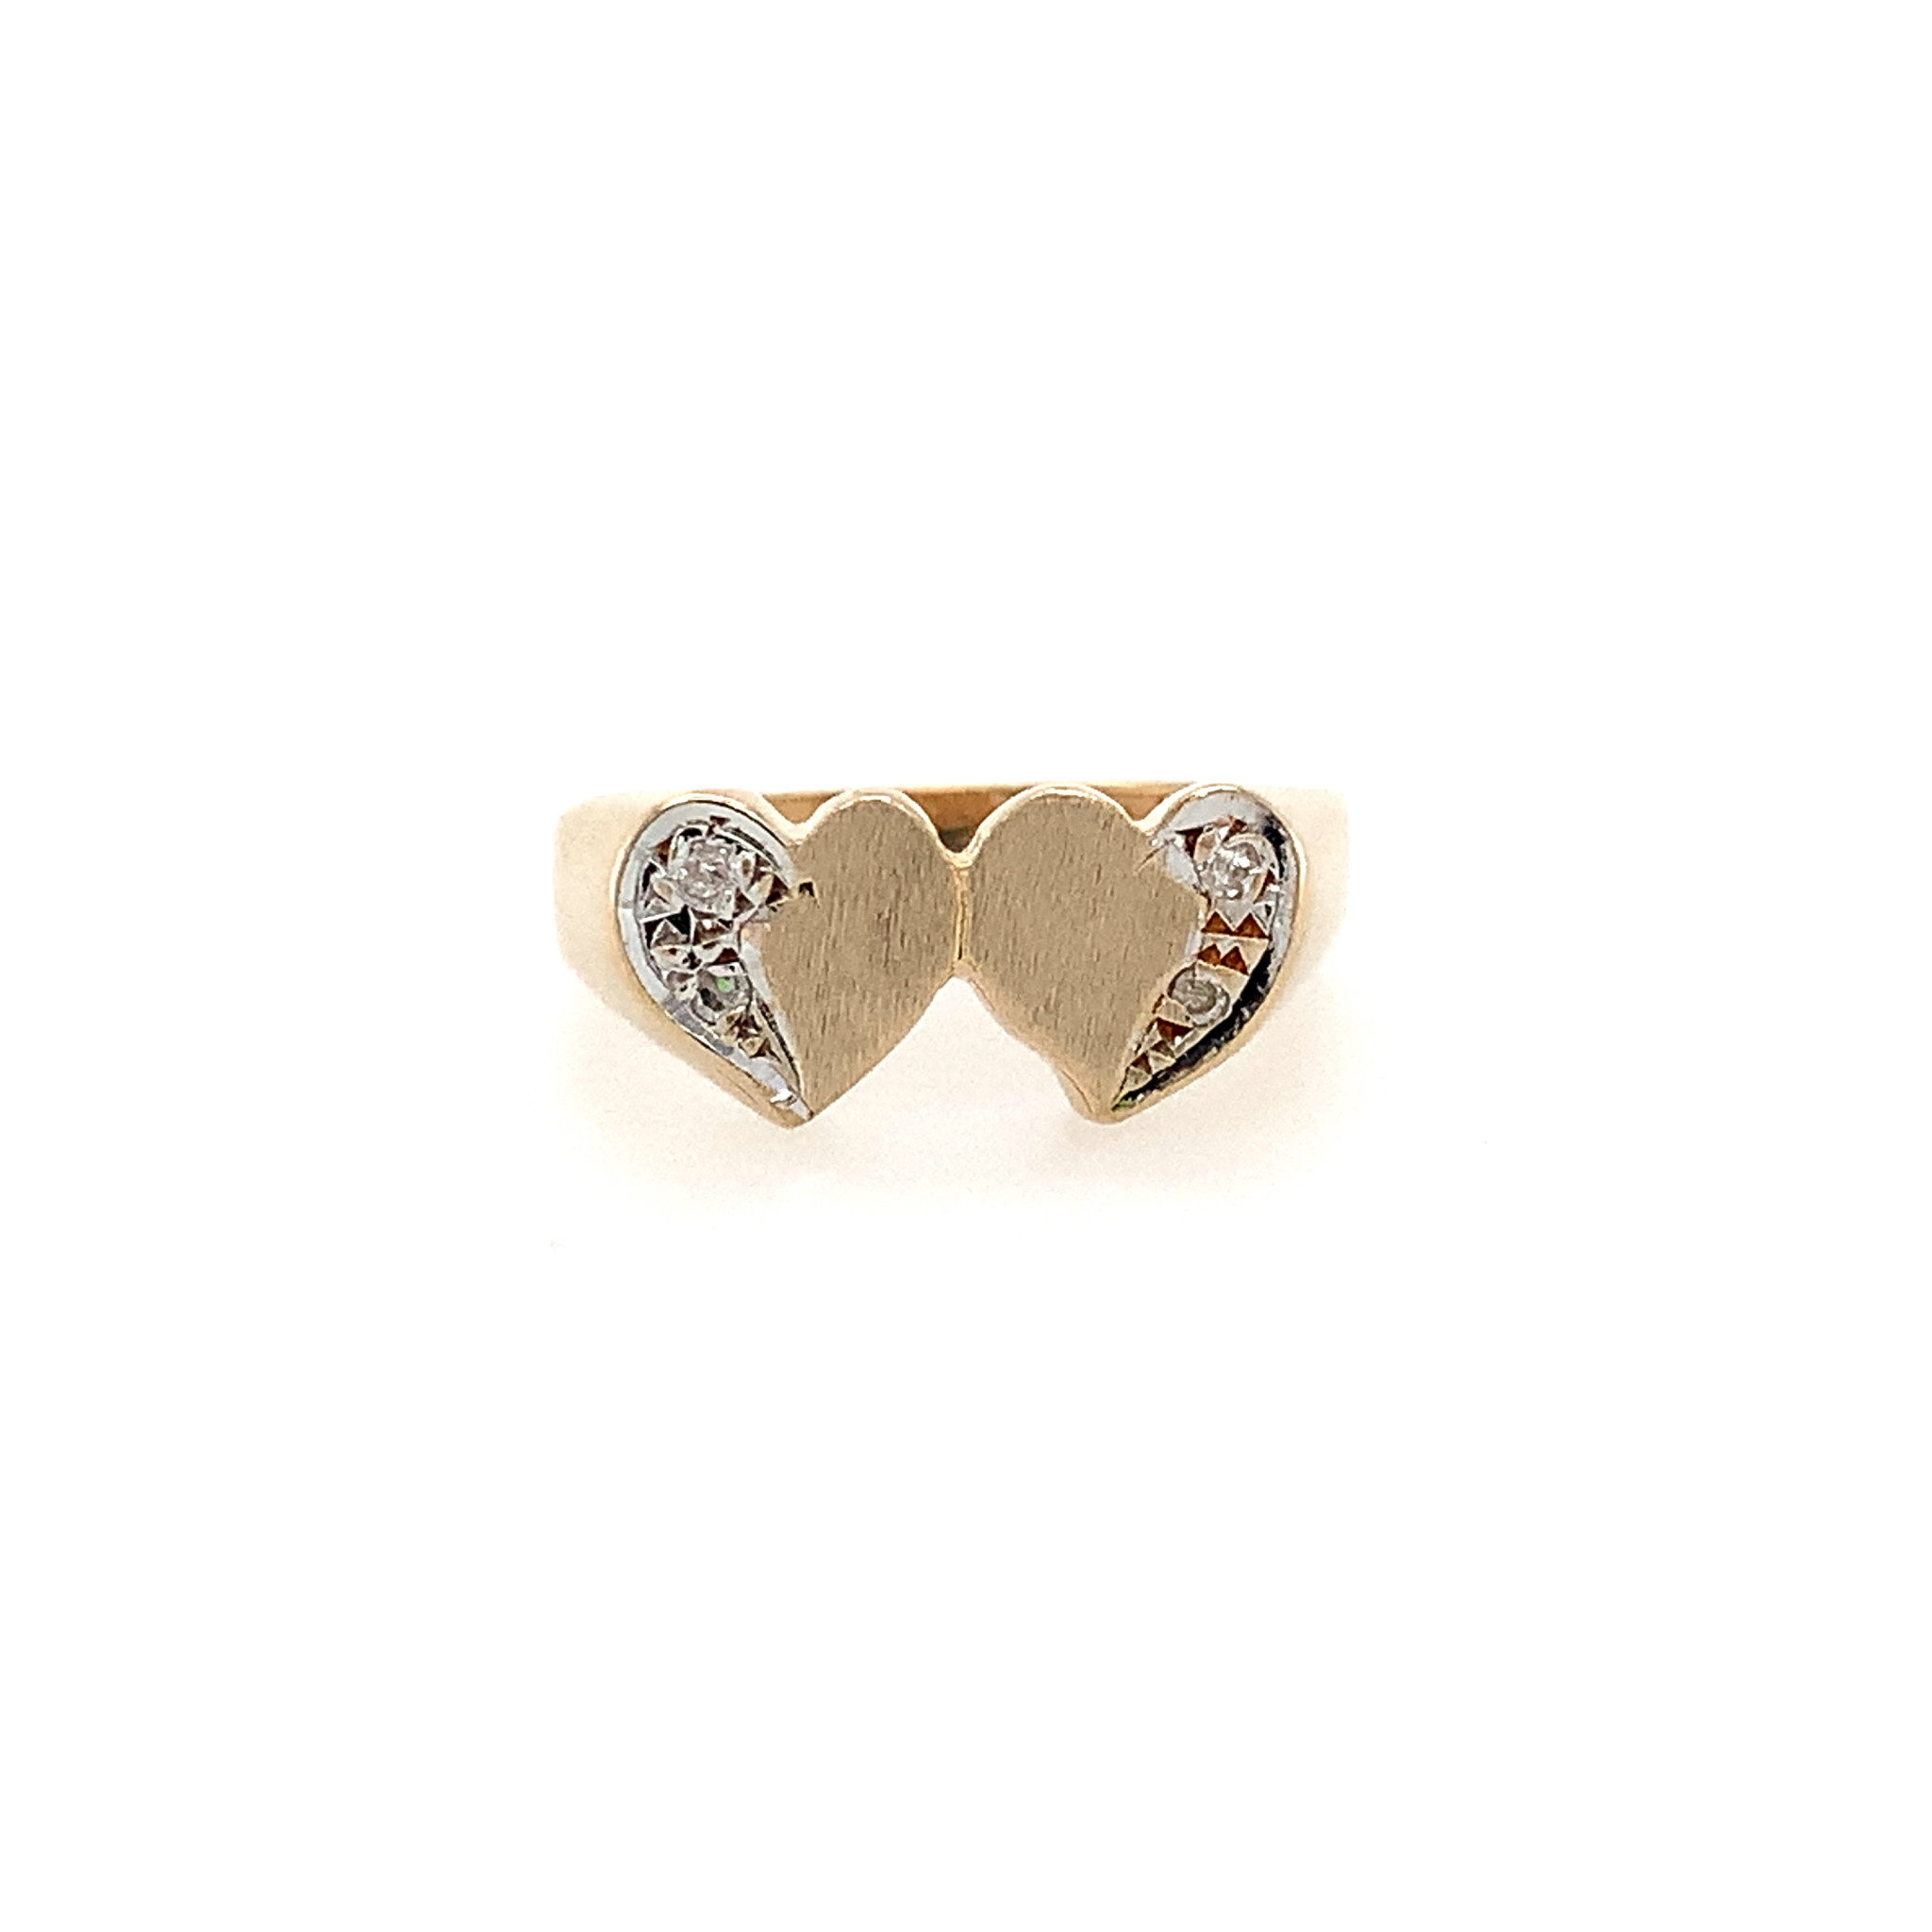 40187 14K YELLOW GOLD DOUBLE HEART WITH DIAMONDS SIGNET RING